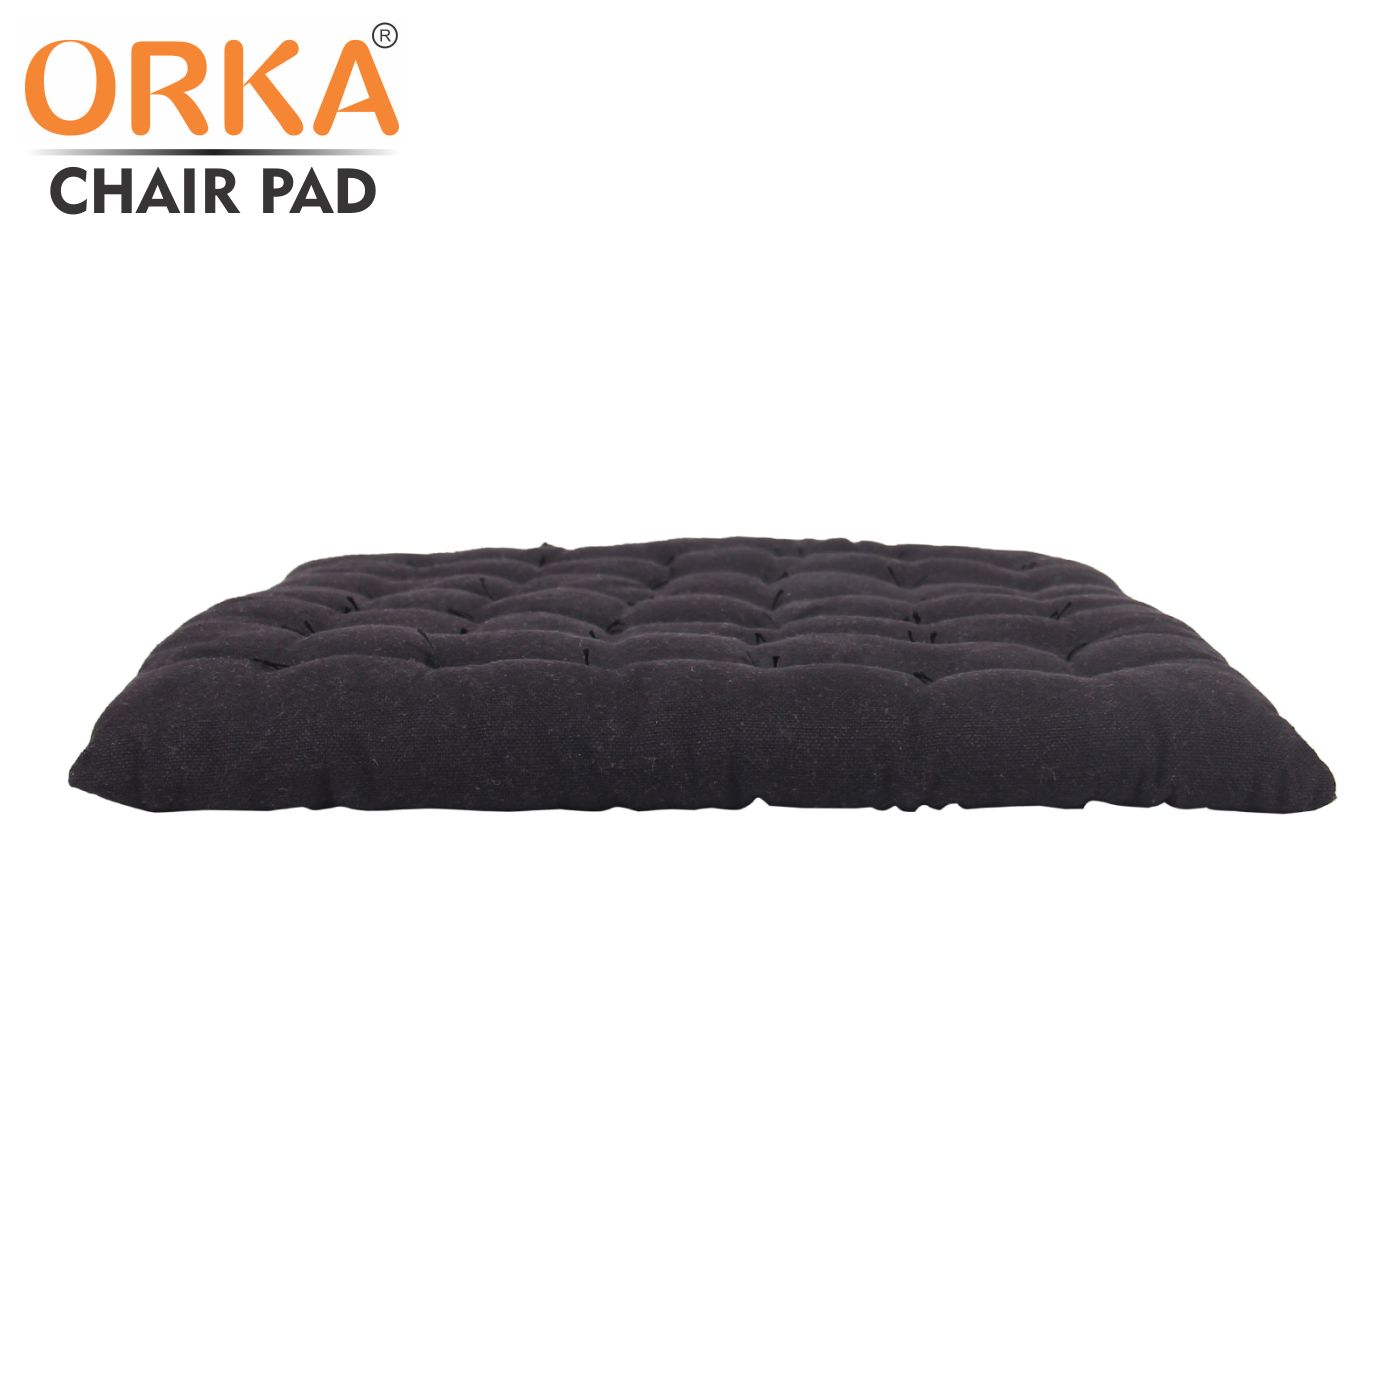 ORKA Cotton Fabric Chair Pad Seat Cushion Back Support Cushion With Tie, Black (16 X 16 Inch)  